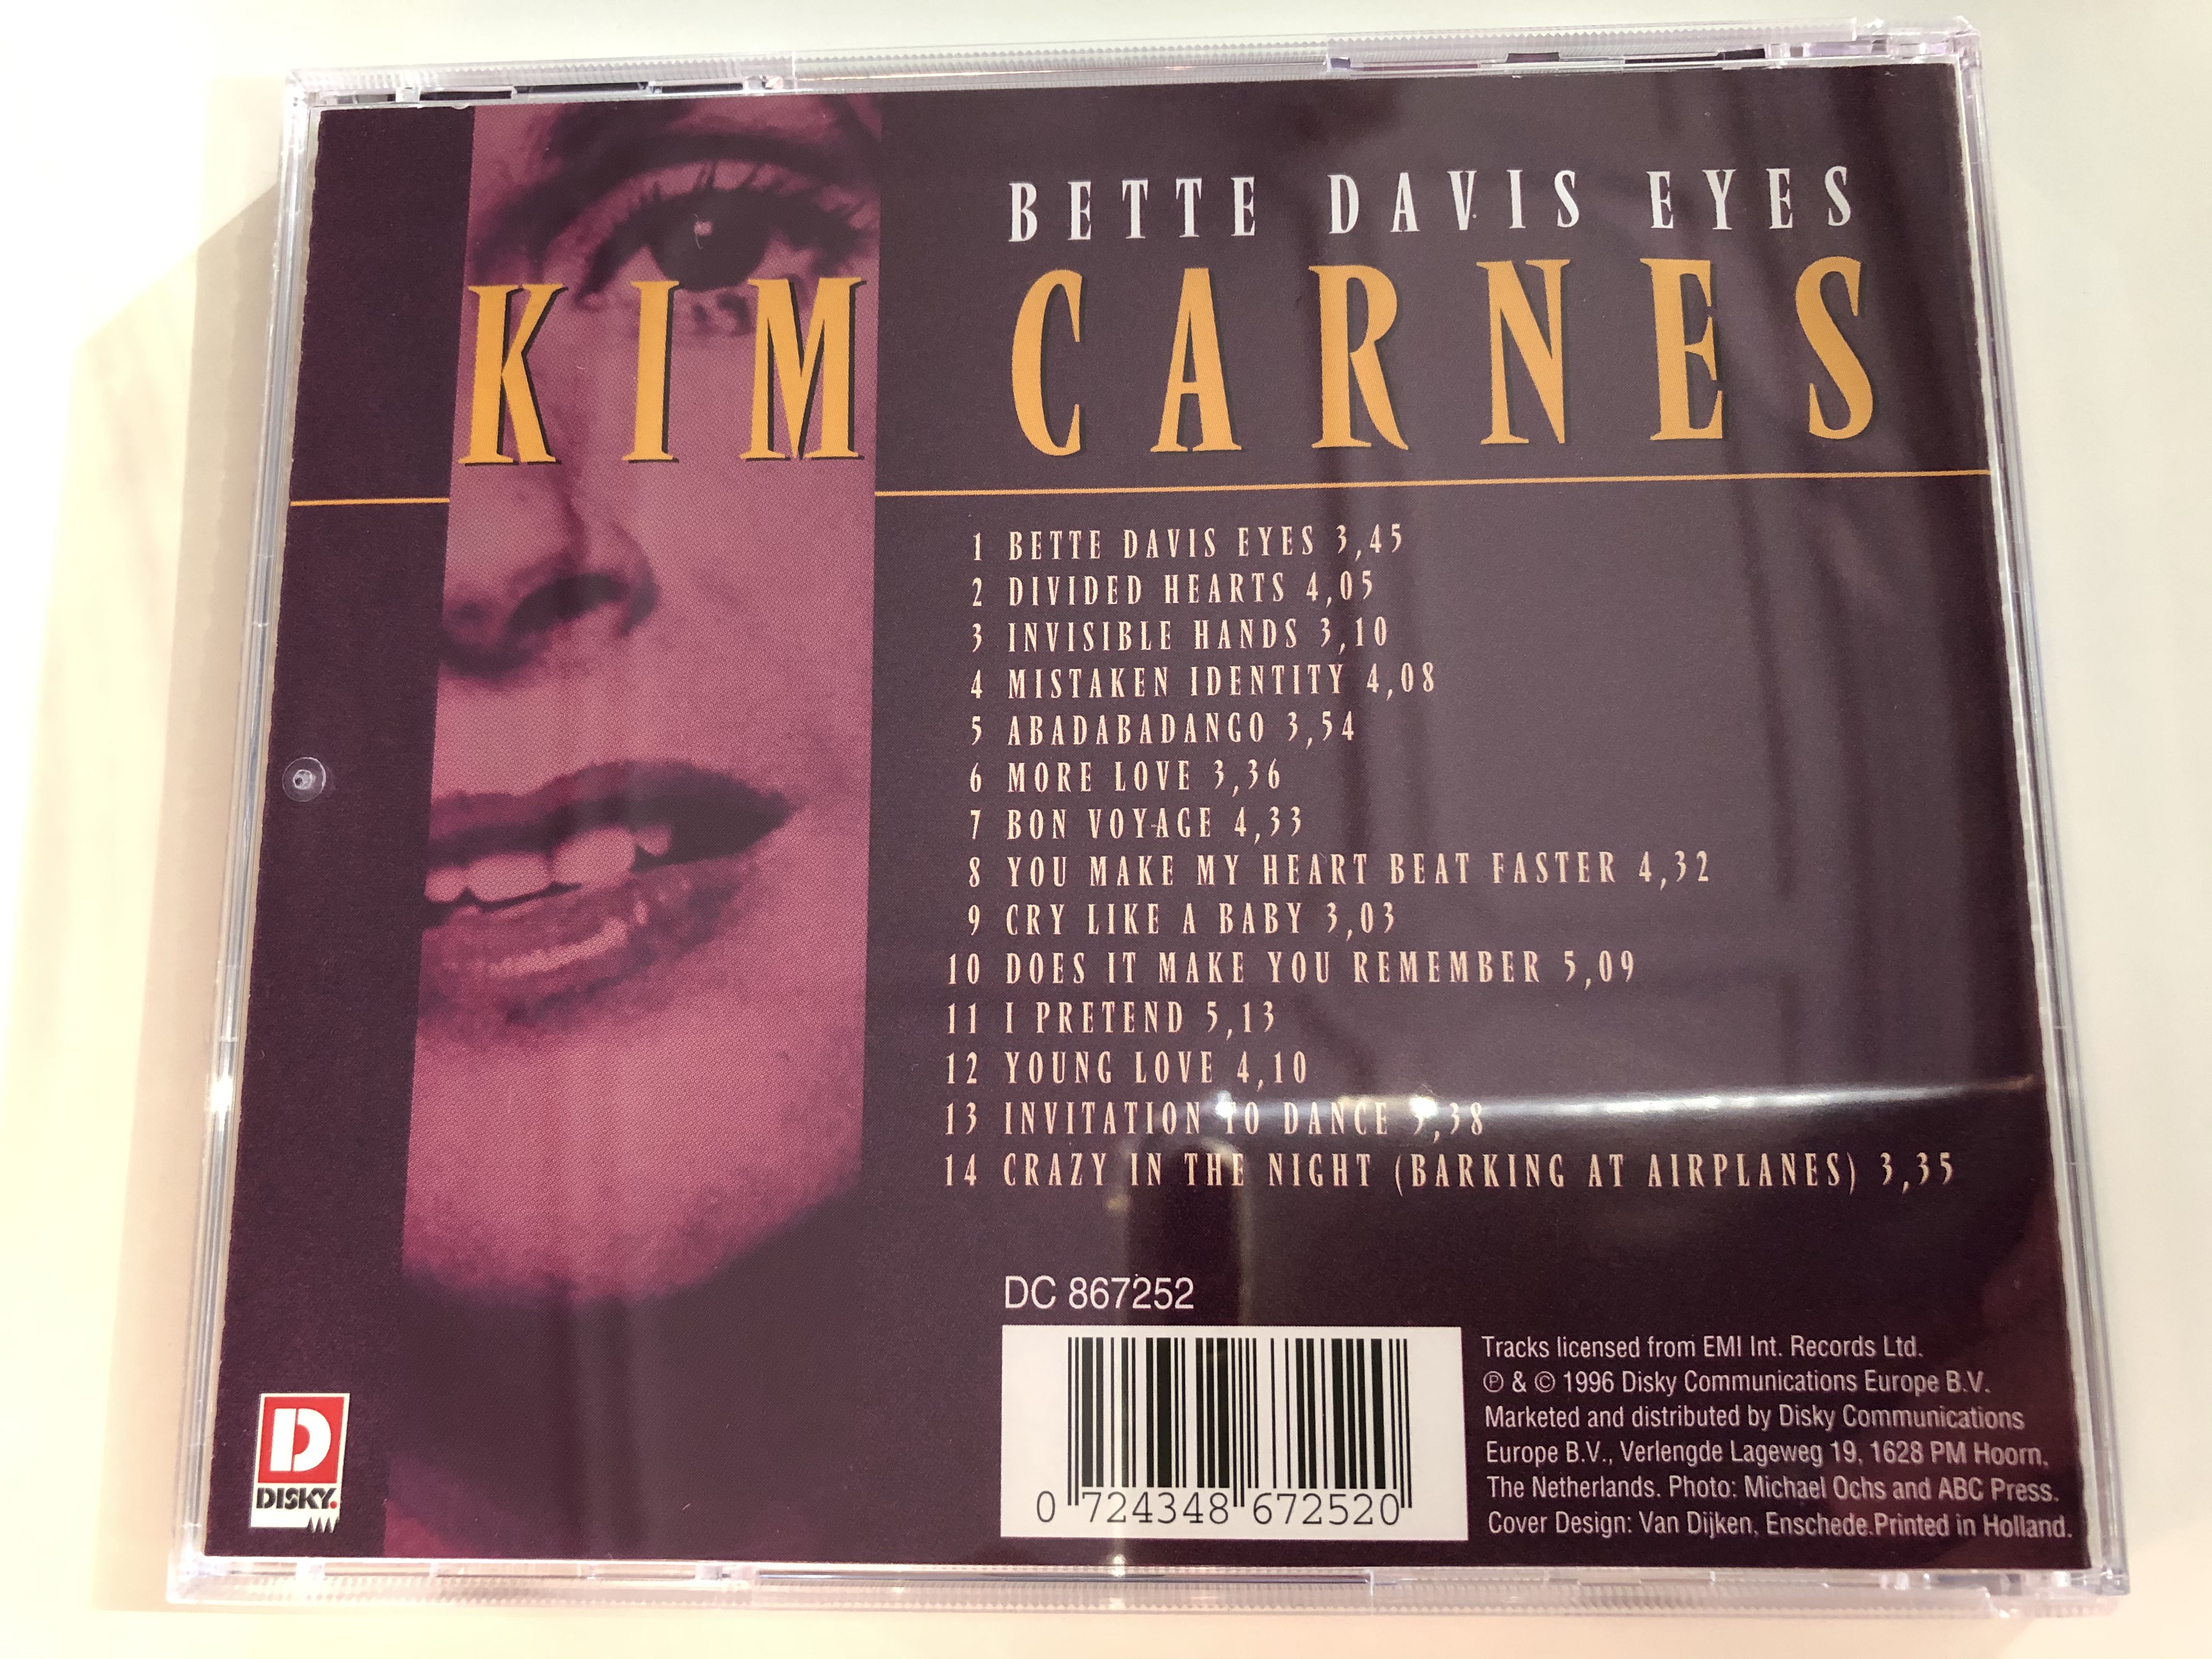 bette-davis-eyes-kim-carnes-invisible-hands-mistaken-identity-does-it-make-you-remember-cry-like-a-baby-disky-audio-cd-1996-dc-867252-4-.jpg